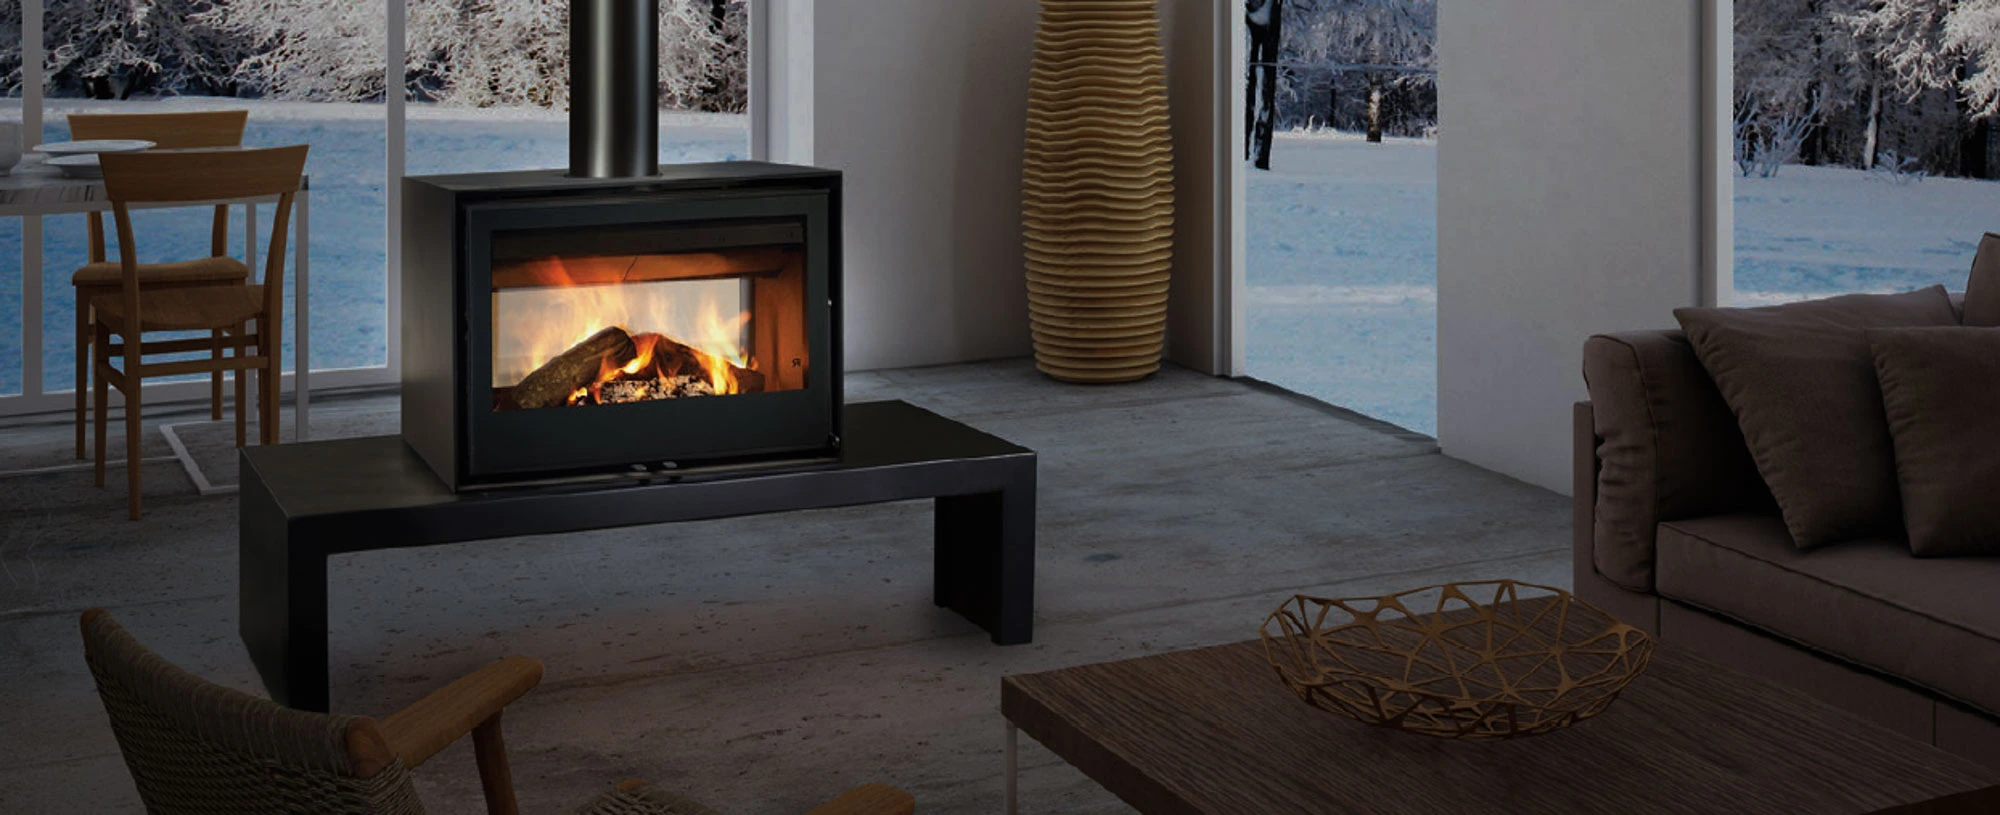  <h2 class='h1-custom' style='transform: rotateX(0deg) translate(0px, 0px); opacity: 1;'></noscript>Transform Your Living Space with a Rocal Fireplace</h2><span class='subheading'>Here's How</span>